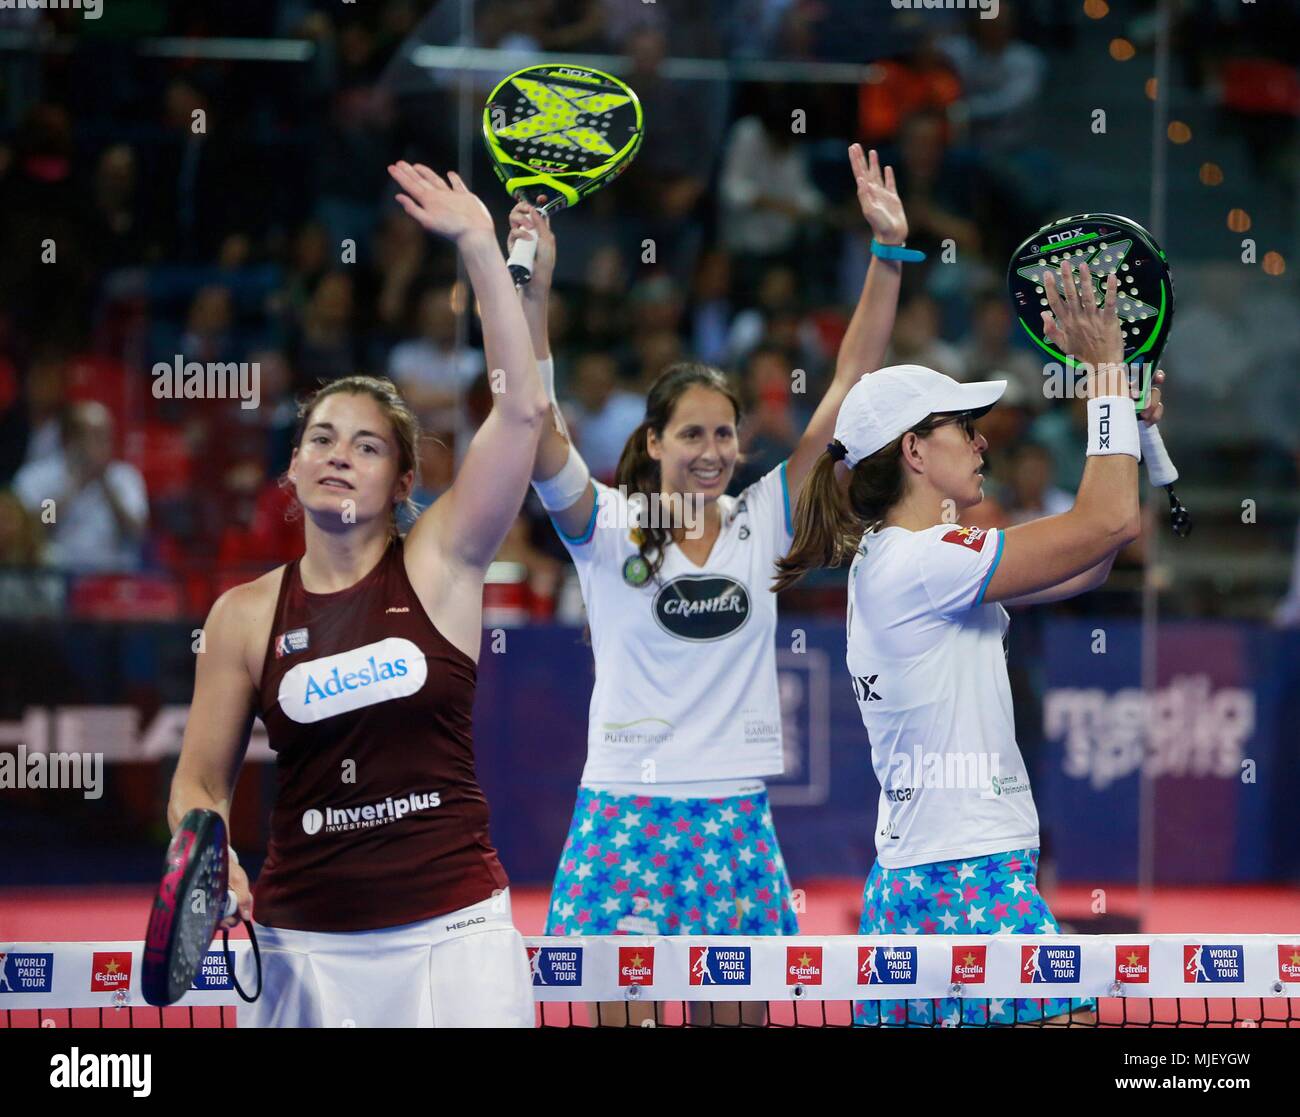 Padel player Gemma Triay (C) and her mate Lucia Sainz (R) celebrate after  defeating Alejandra Salazar (L) and Marta Marrero (out of frame), during  the semifinals of the Estrella Damm Zaragoza Open